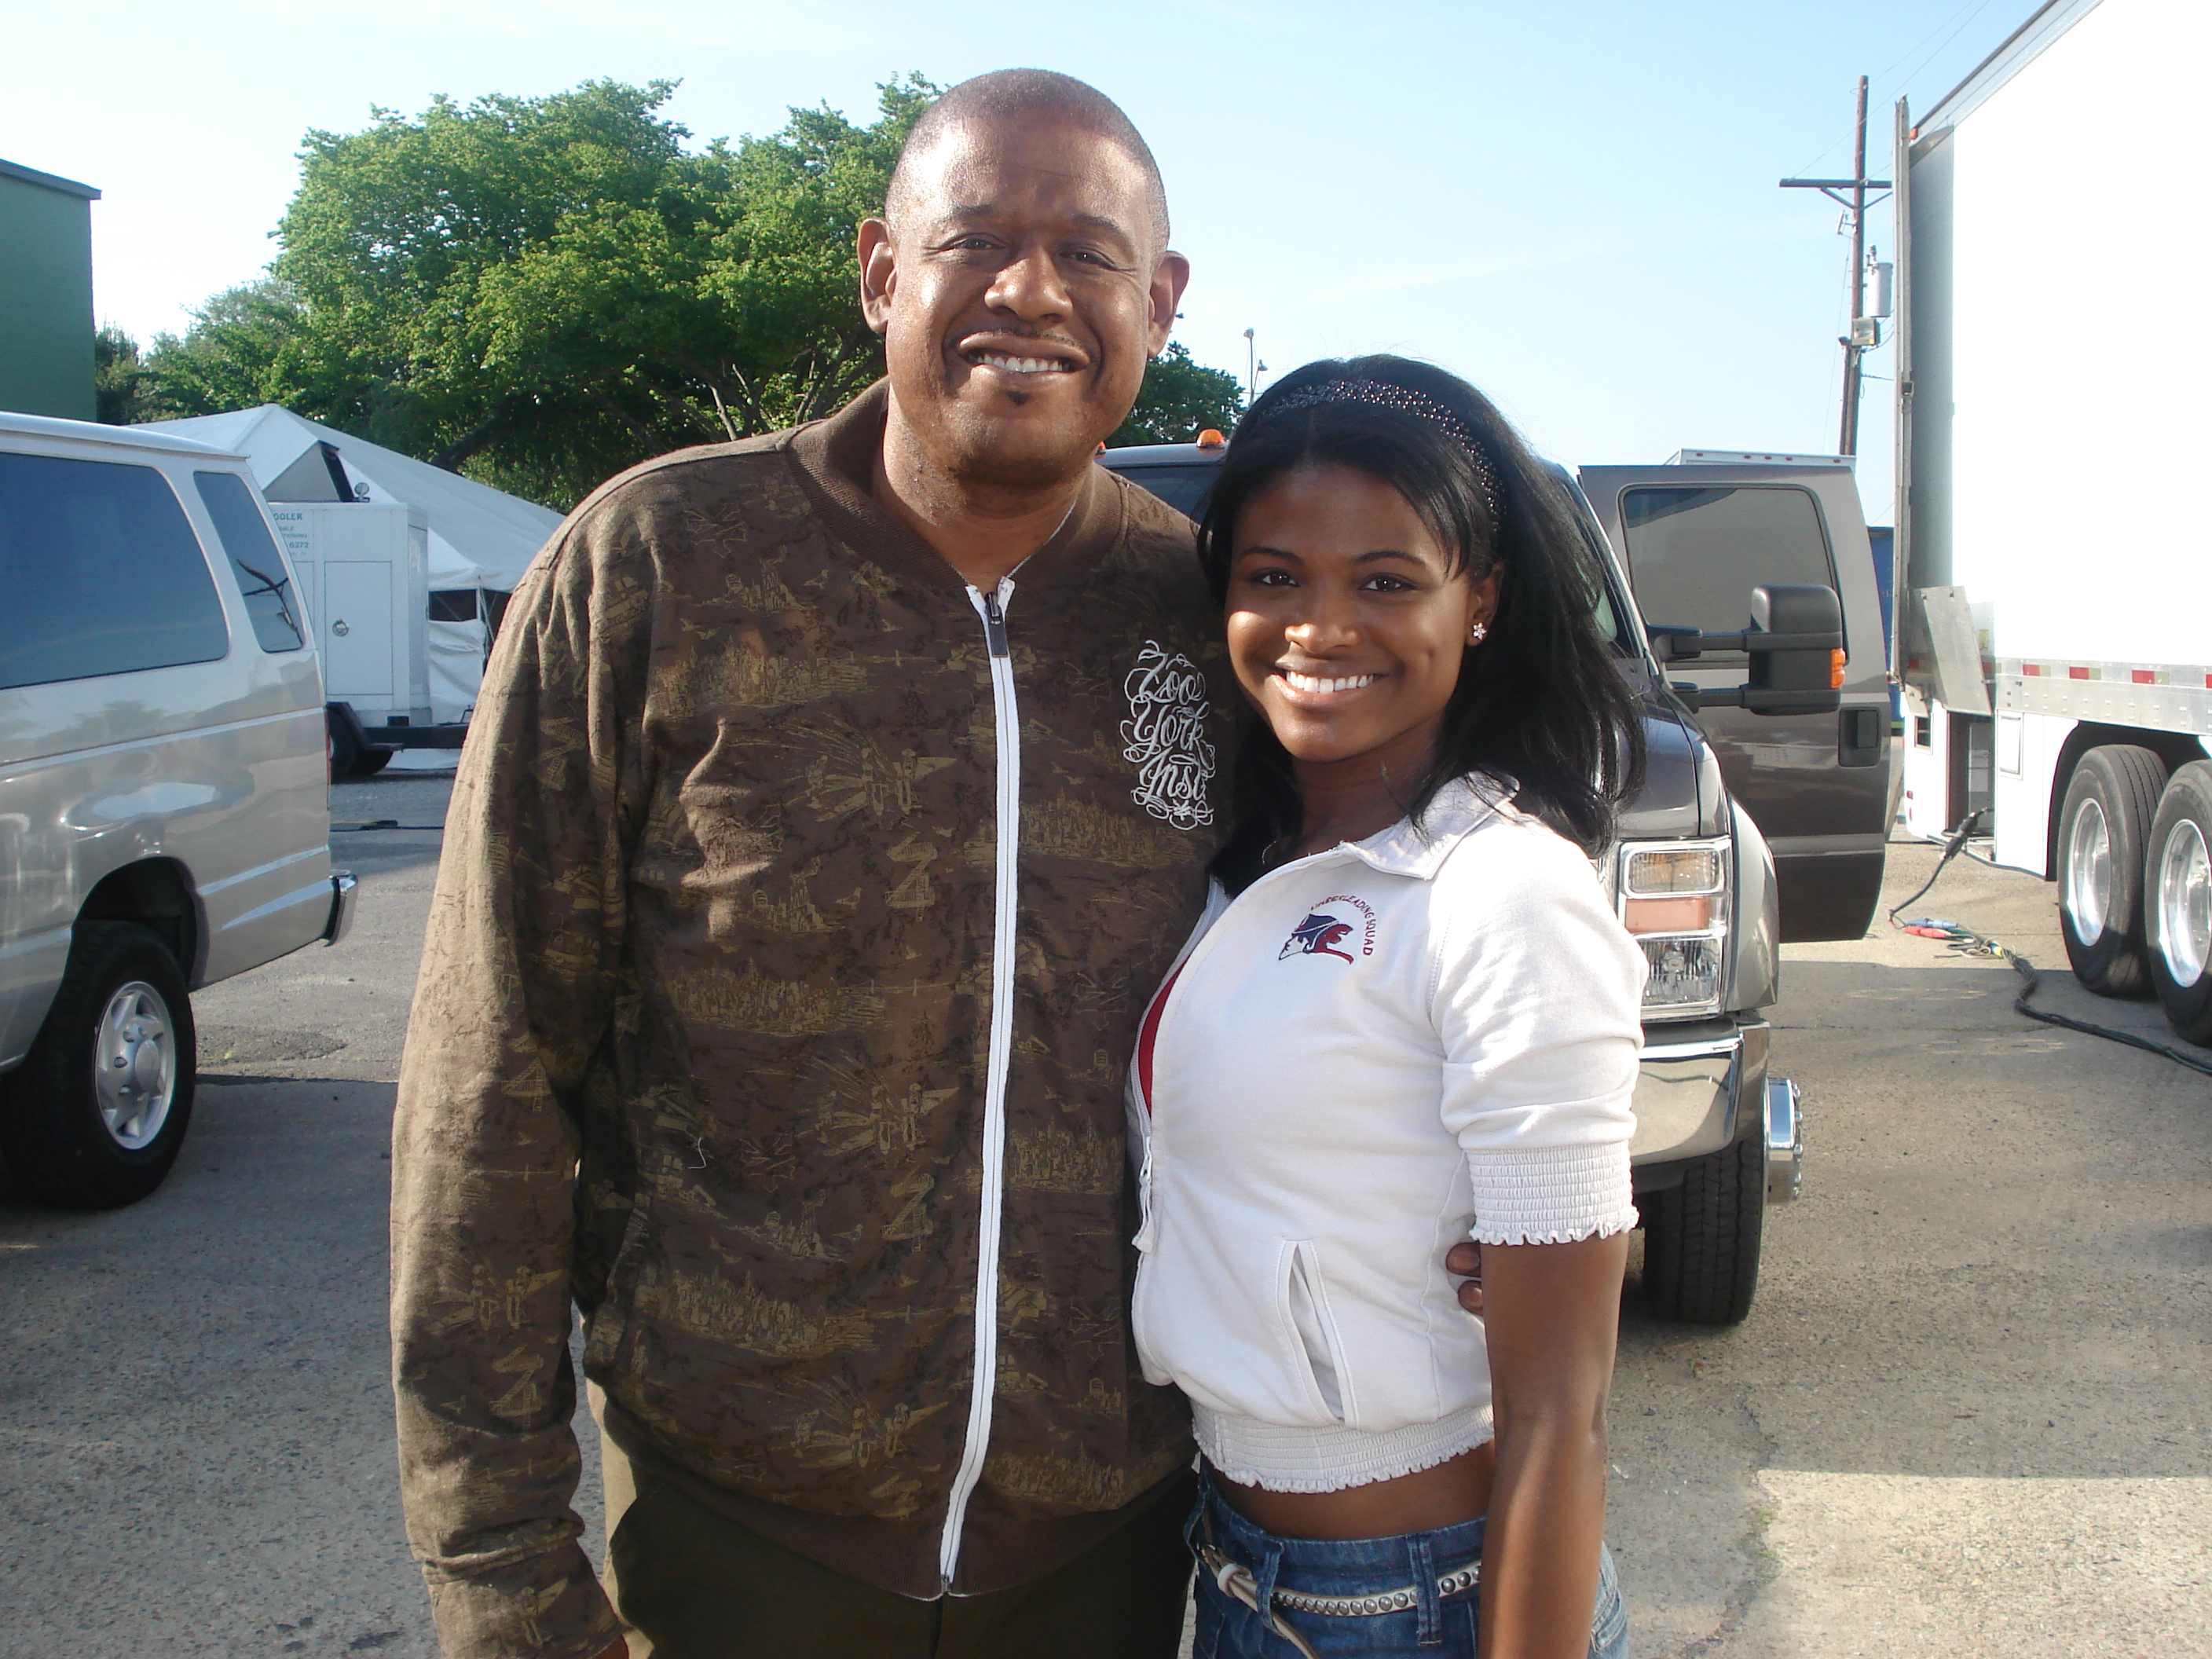 Lindsey G Smith with Forest Whitaker on the set of Hurricane Season